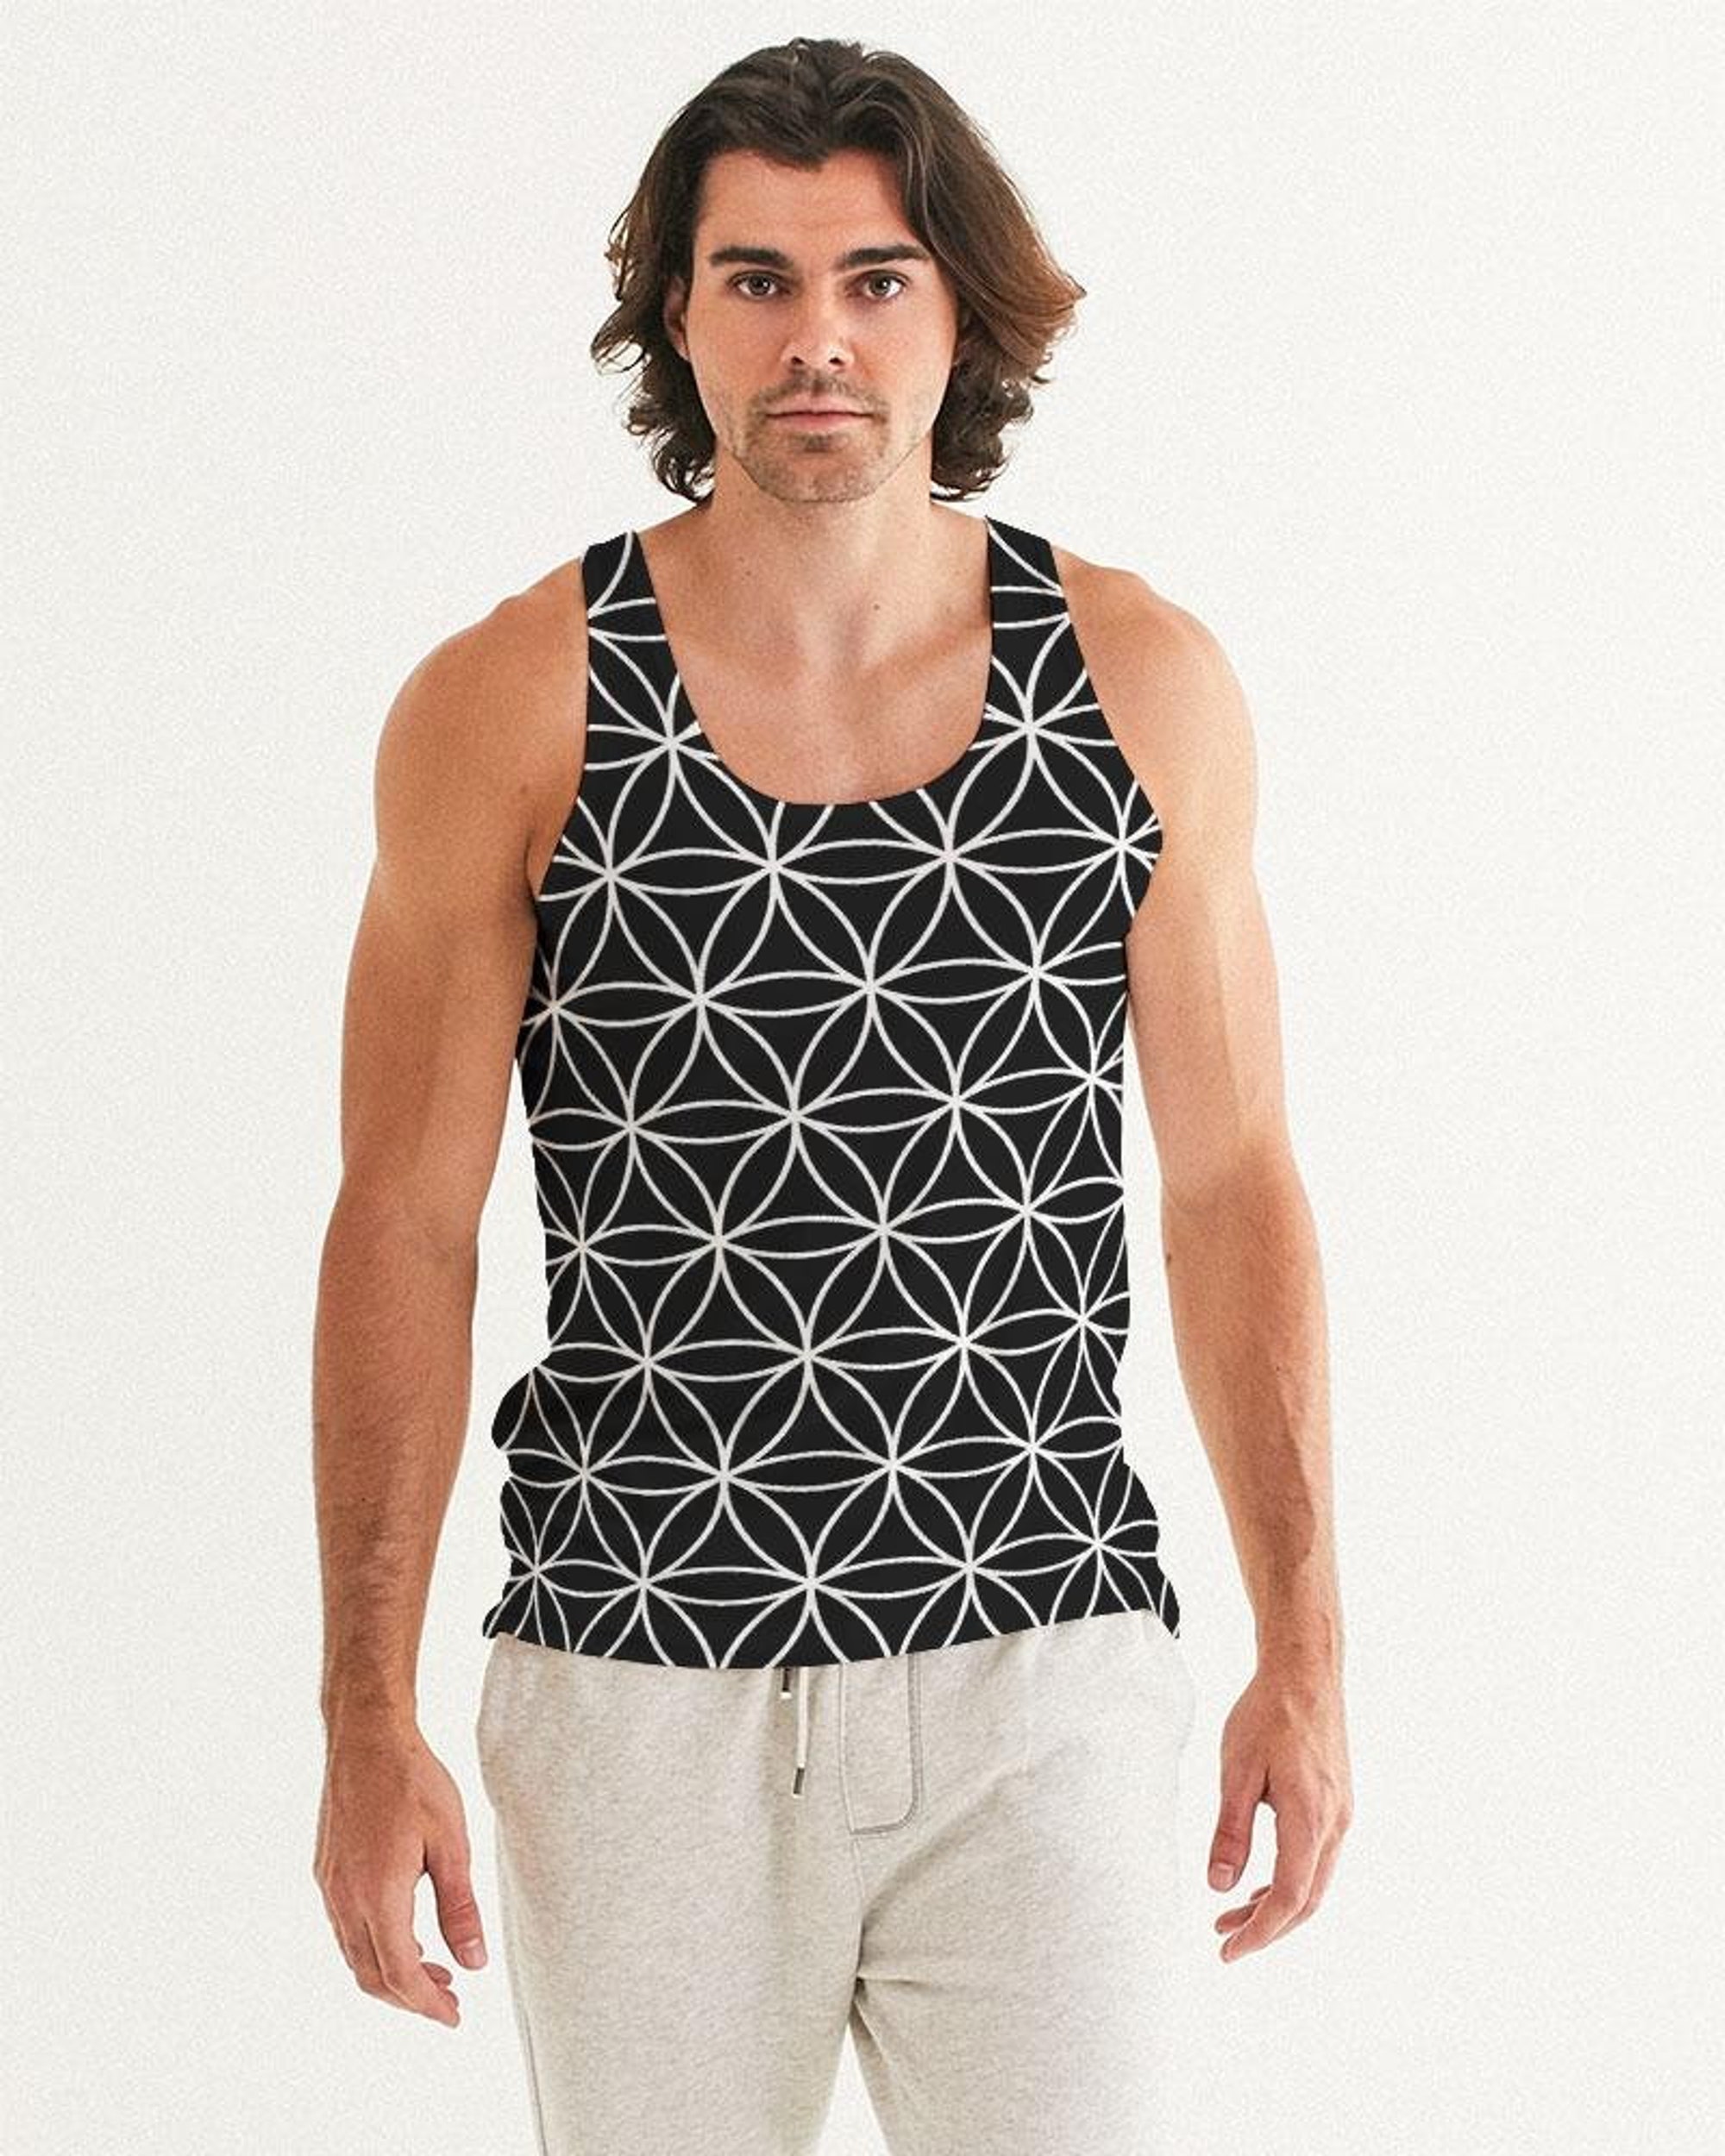 Discover Flower Of Life 3D Tank Top